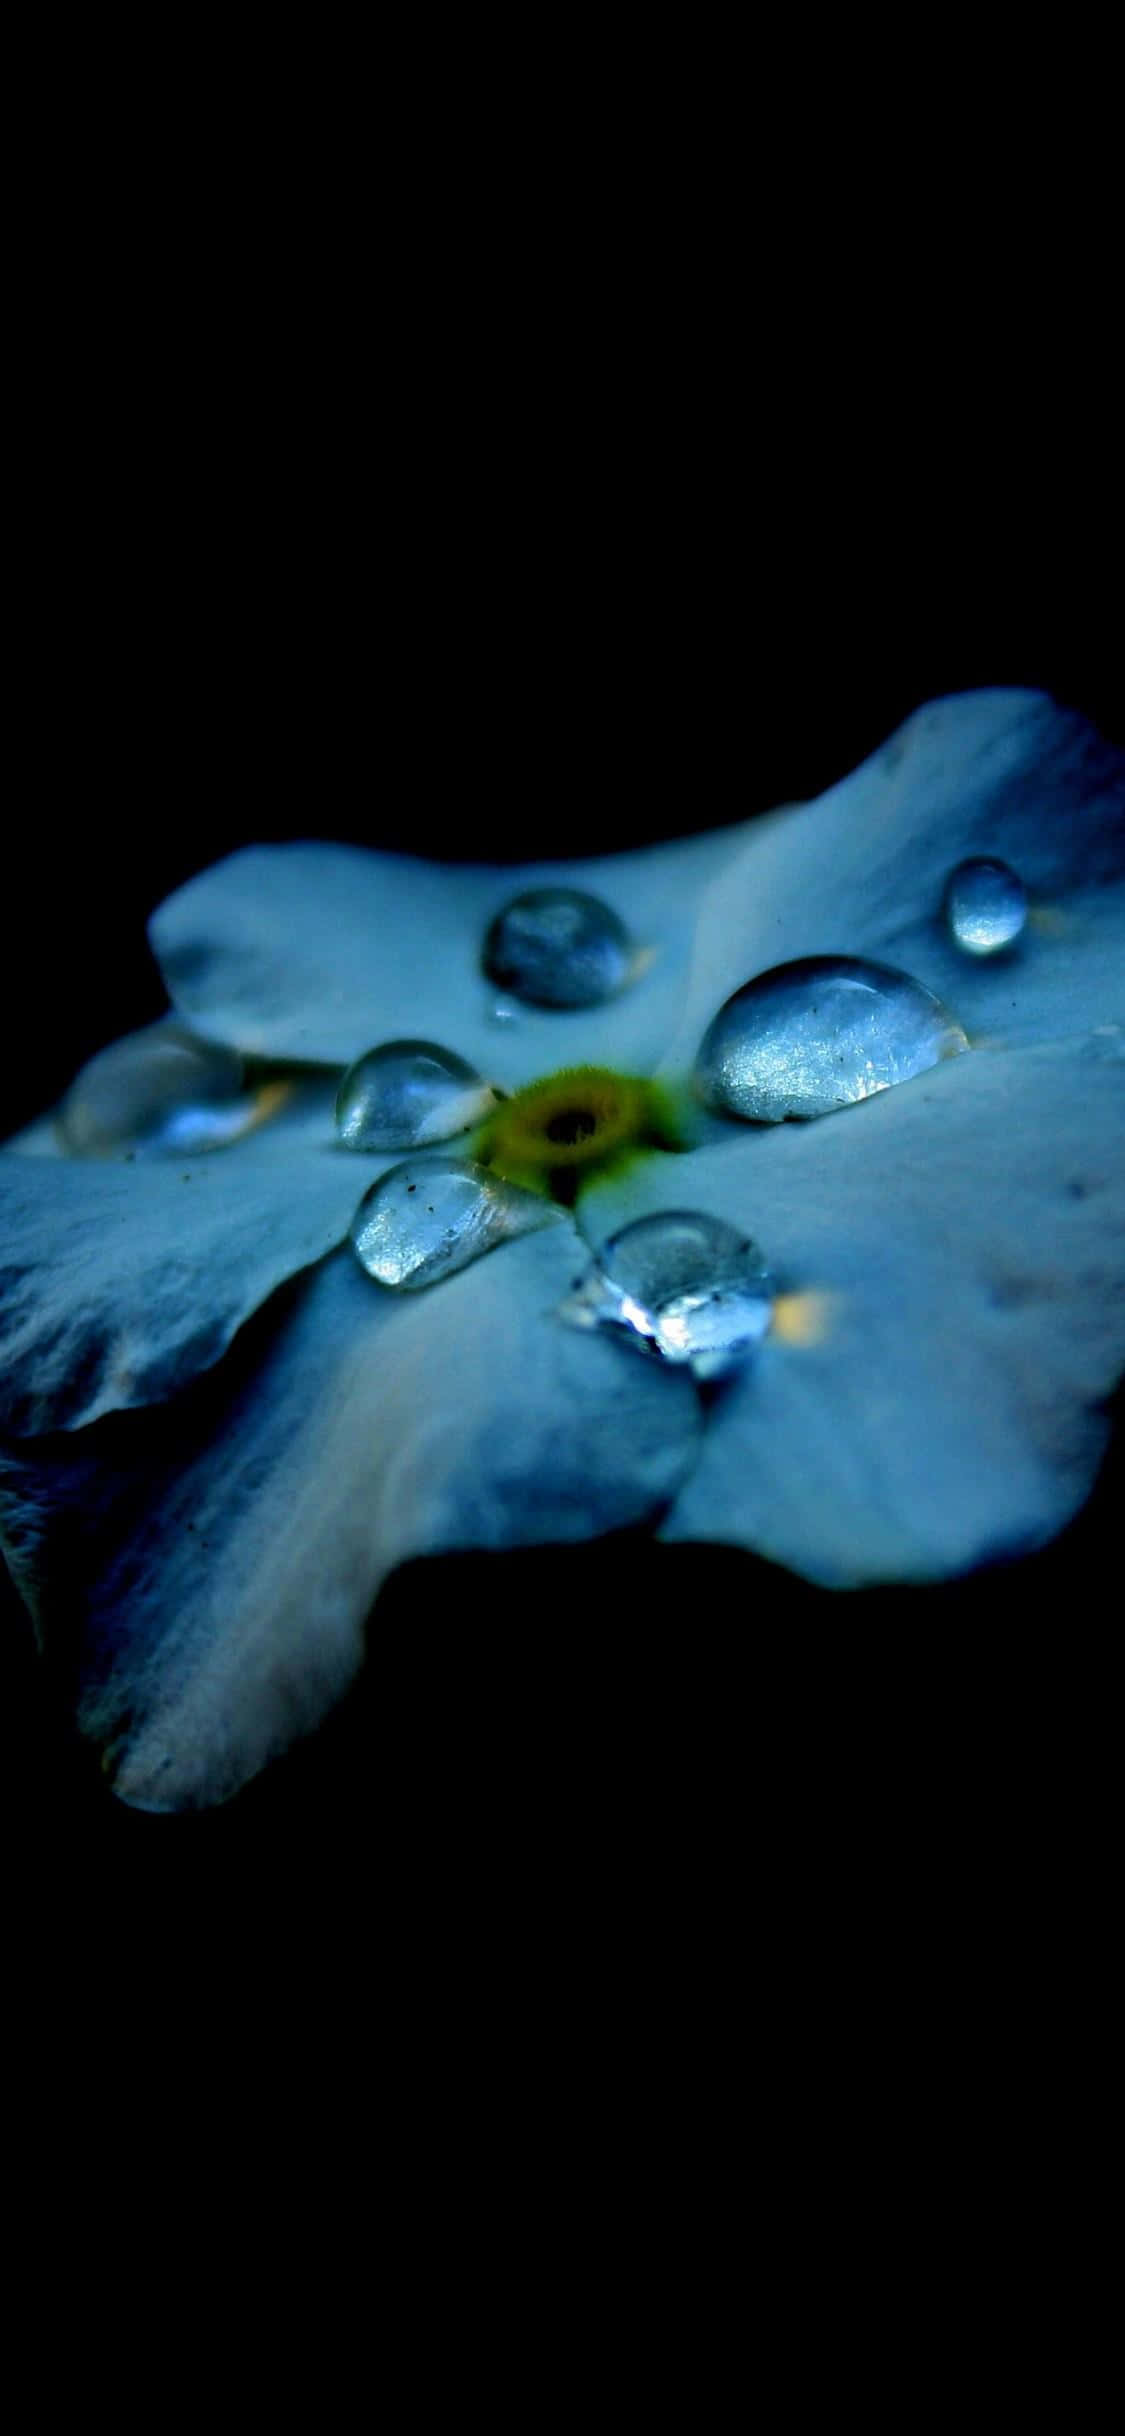 A Blue Flower With Water Droplets On It